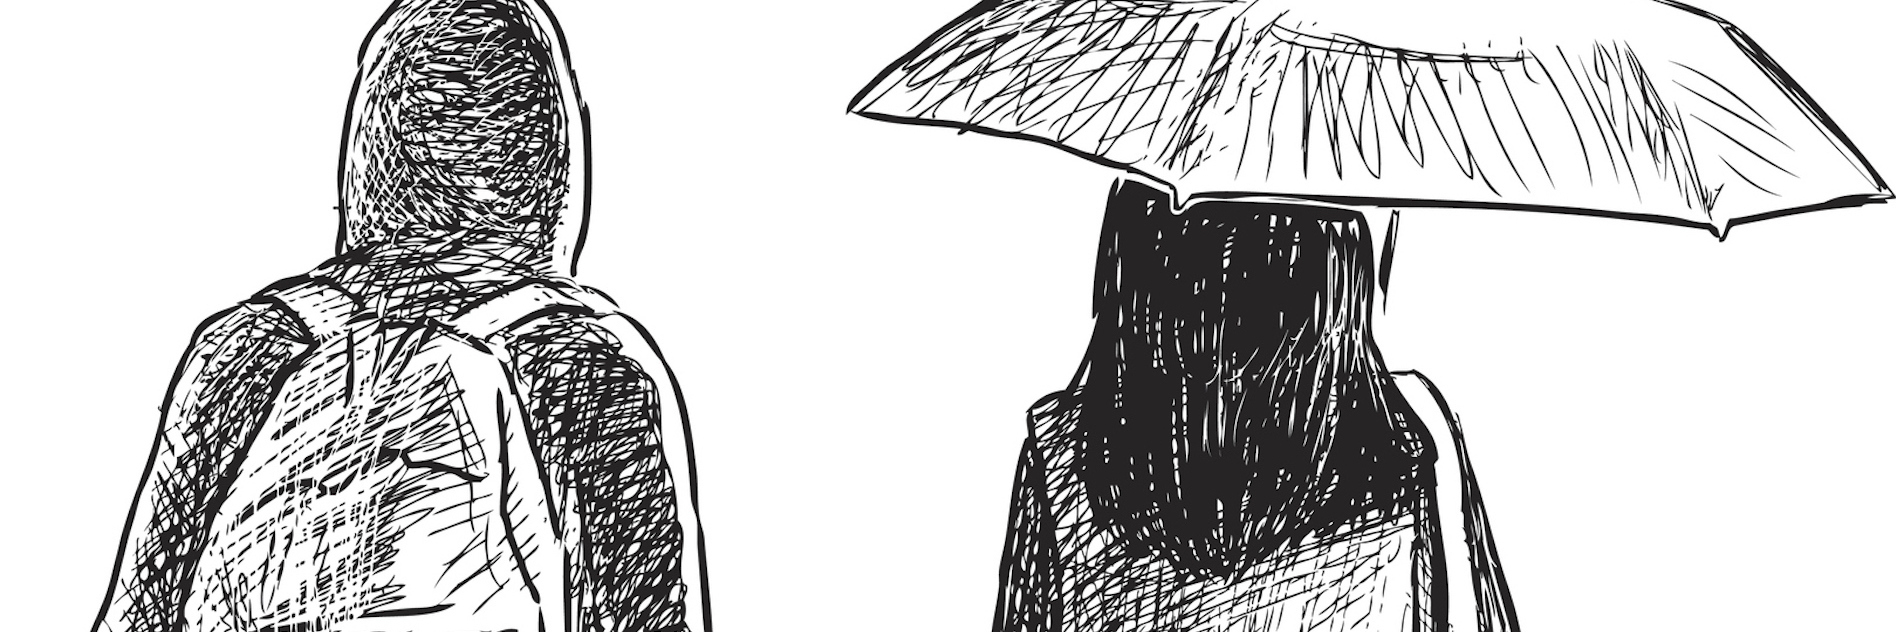 Illustration of two people walking, one wearing a backpack and the other holding an umbrella